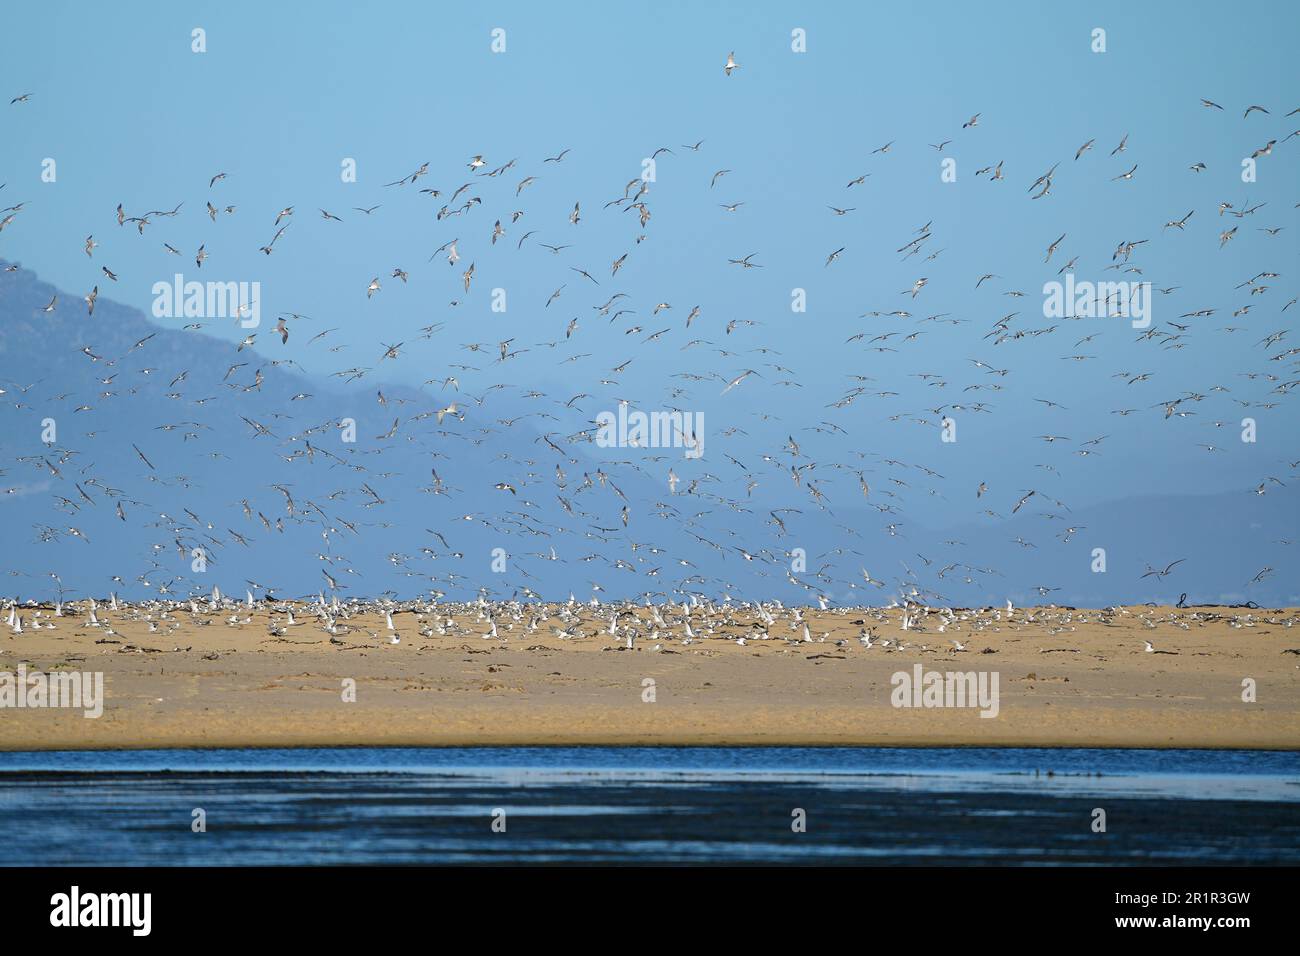 Tern Roost, Bot River Mouth, Overberg, Sudafrica Foto Stock